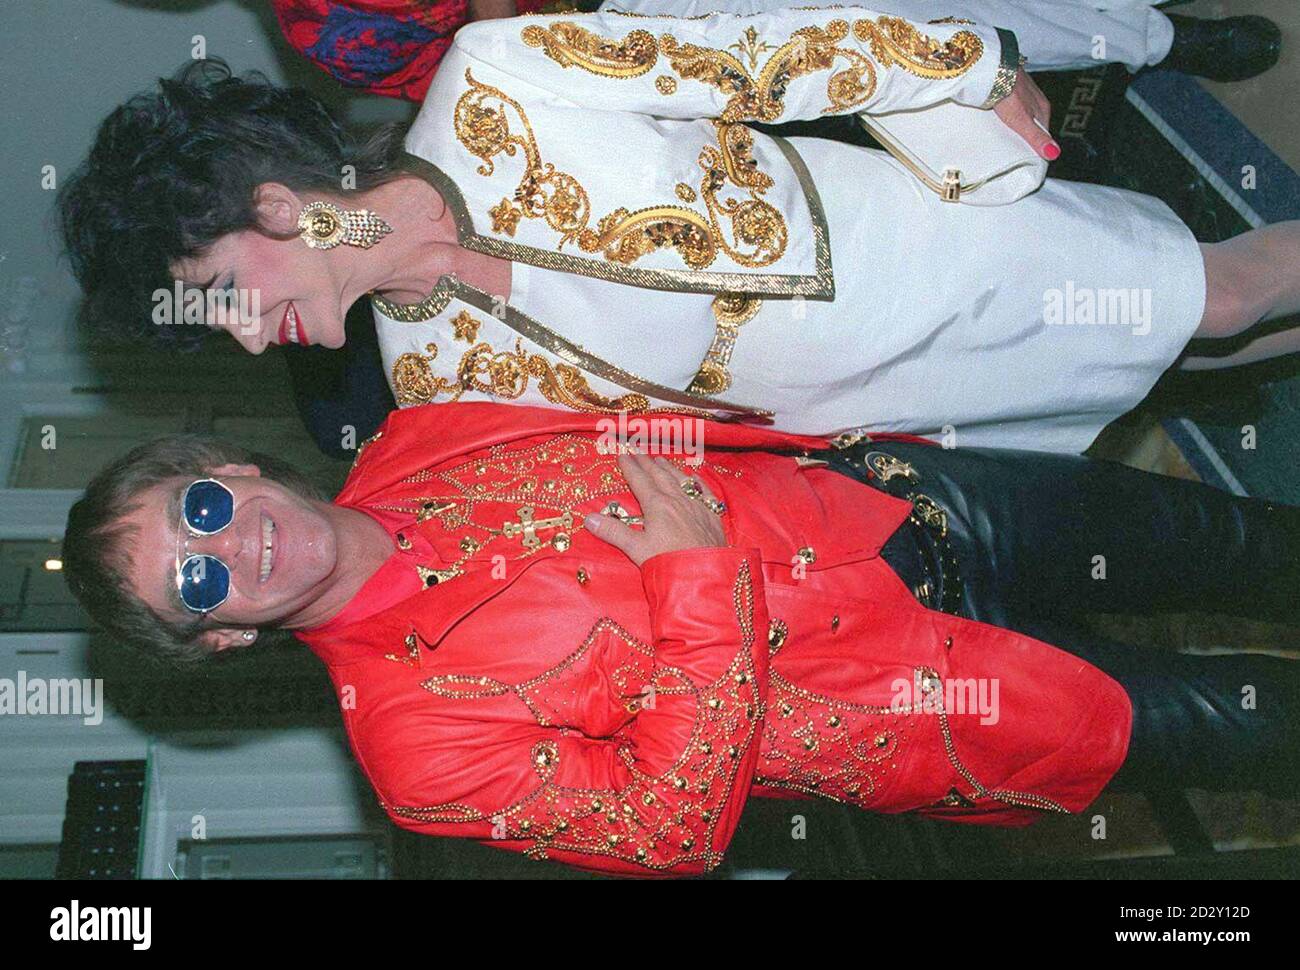 Singer Elton John with actress Joan Collins at the opening of Italian  designer Gianni Versace 's shop in London. * 15/7/97 Fashion designer  Versace, has been killed in a drive by shooting